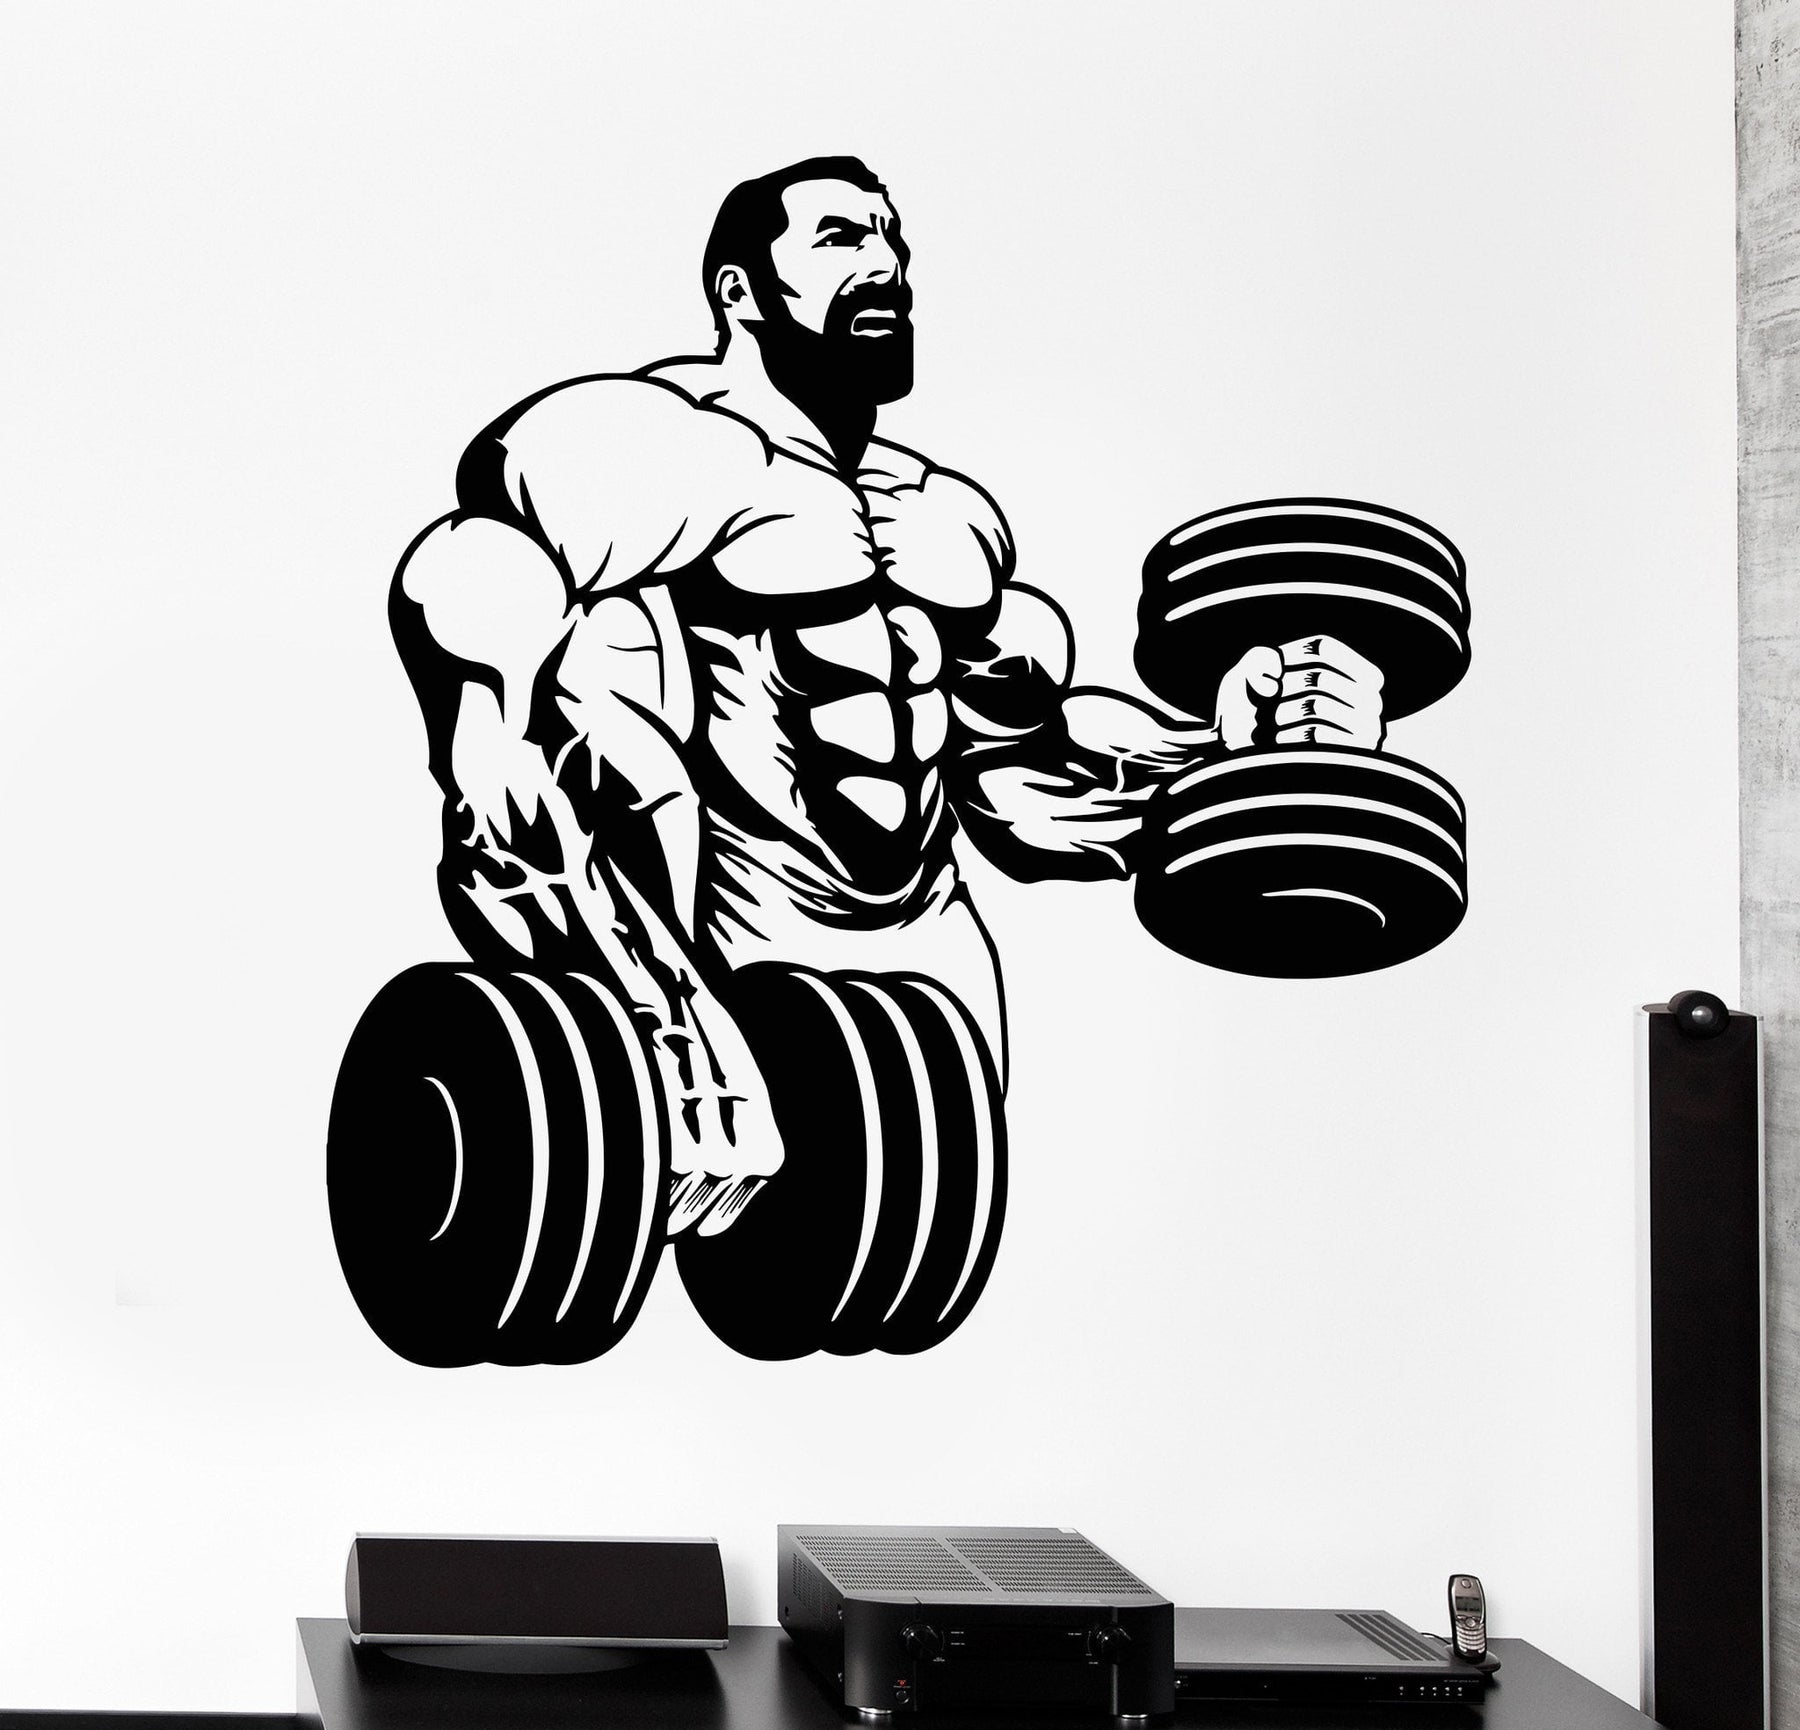 Best Lifter Bodybuilder Funny Gifts For Gym Lovers Sticker for Sale by  nquestiaa